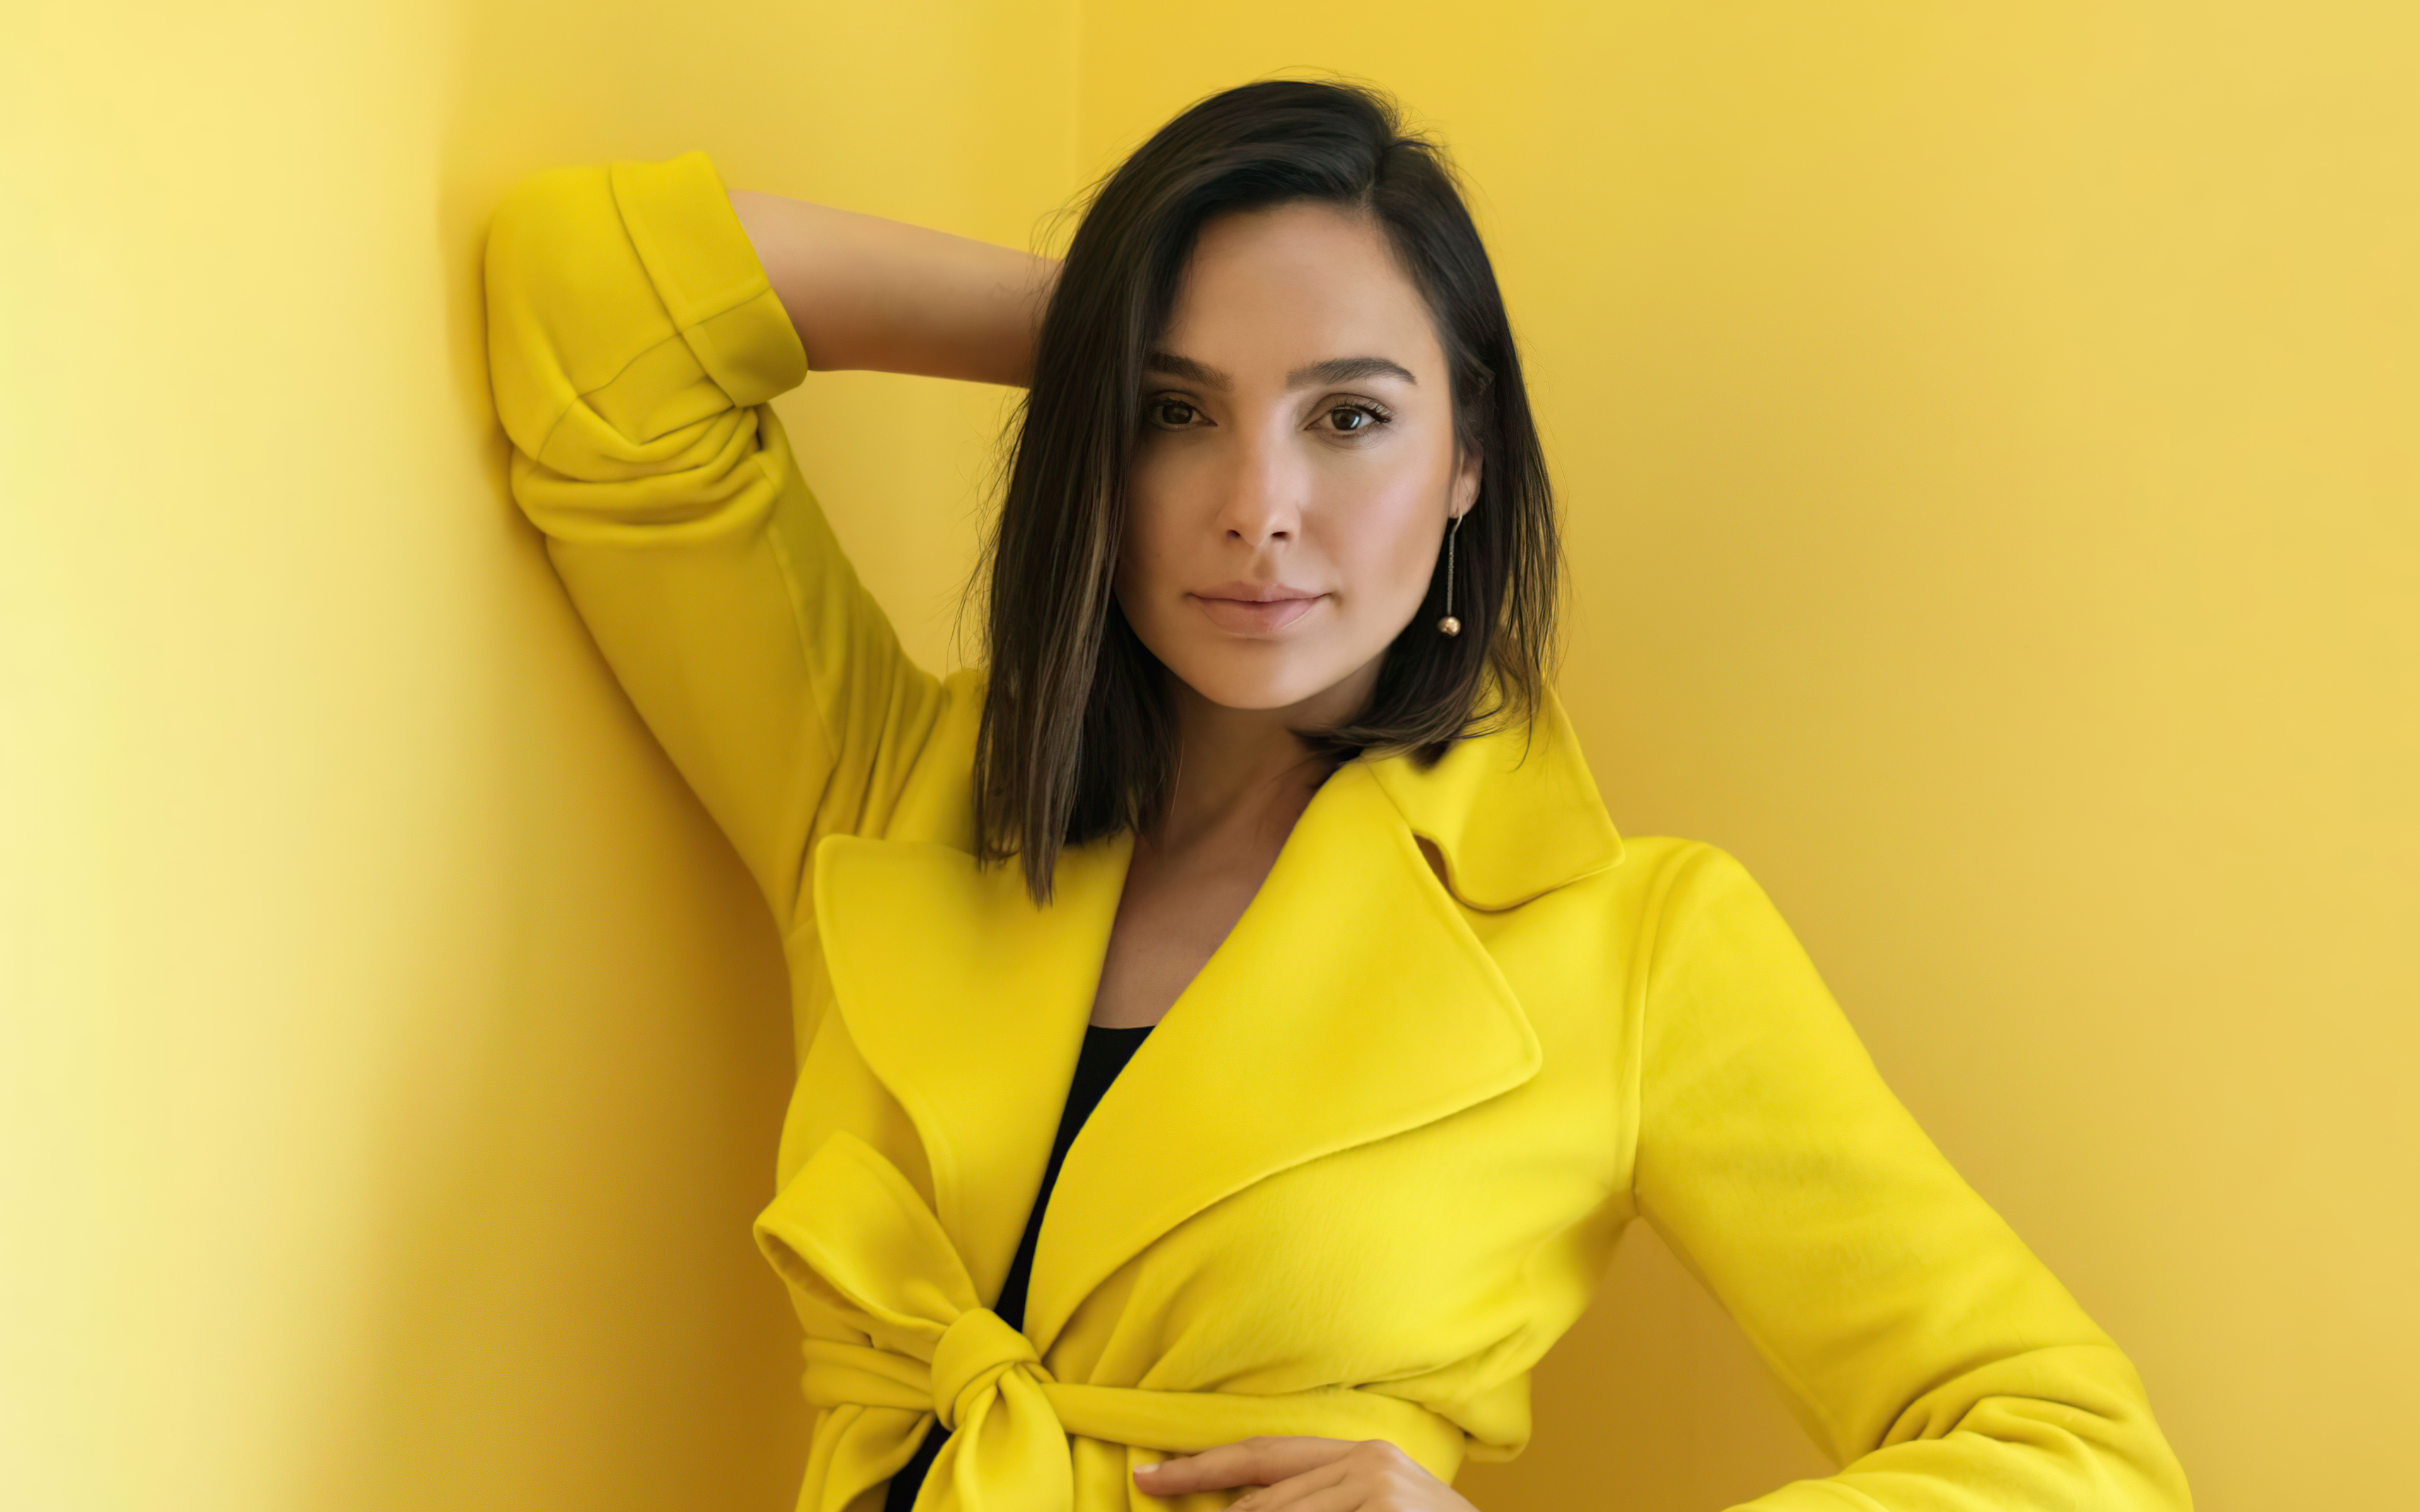 People 3840x2400 women model actress Gal Gadot studio yellow yellow background yellow clothing dark hair looking at viewer women indoors indoors yellow coats simple background by the wall brown eyes portrait